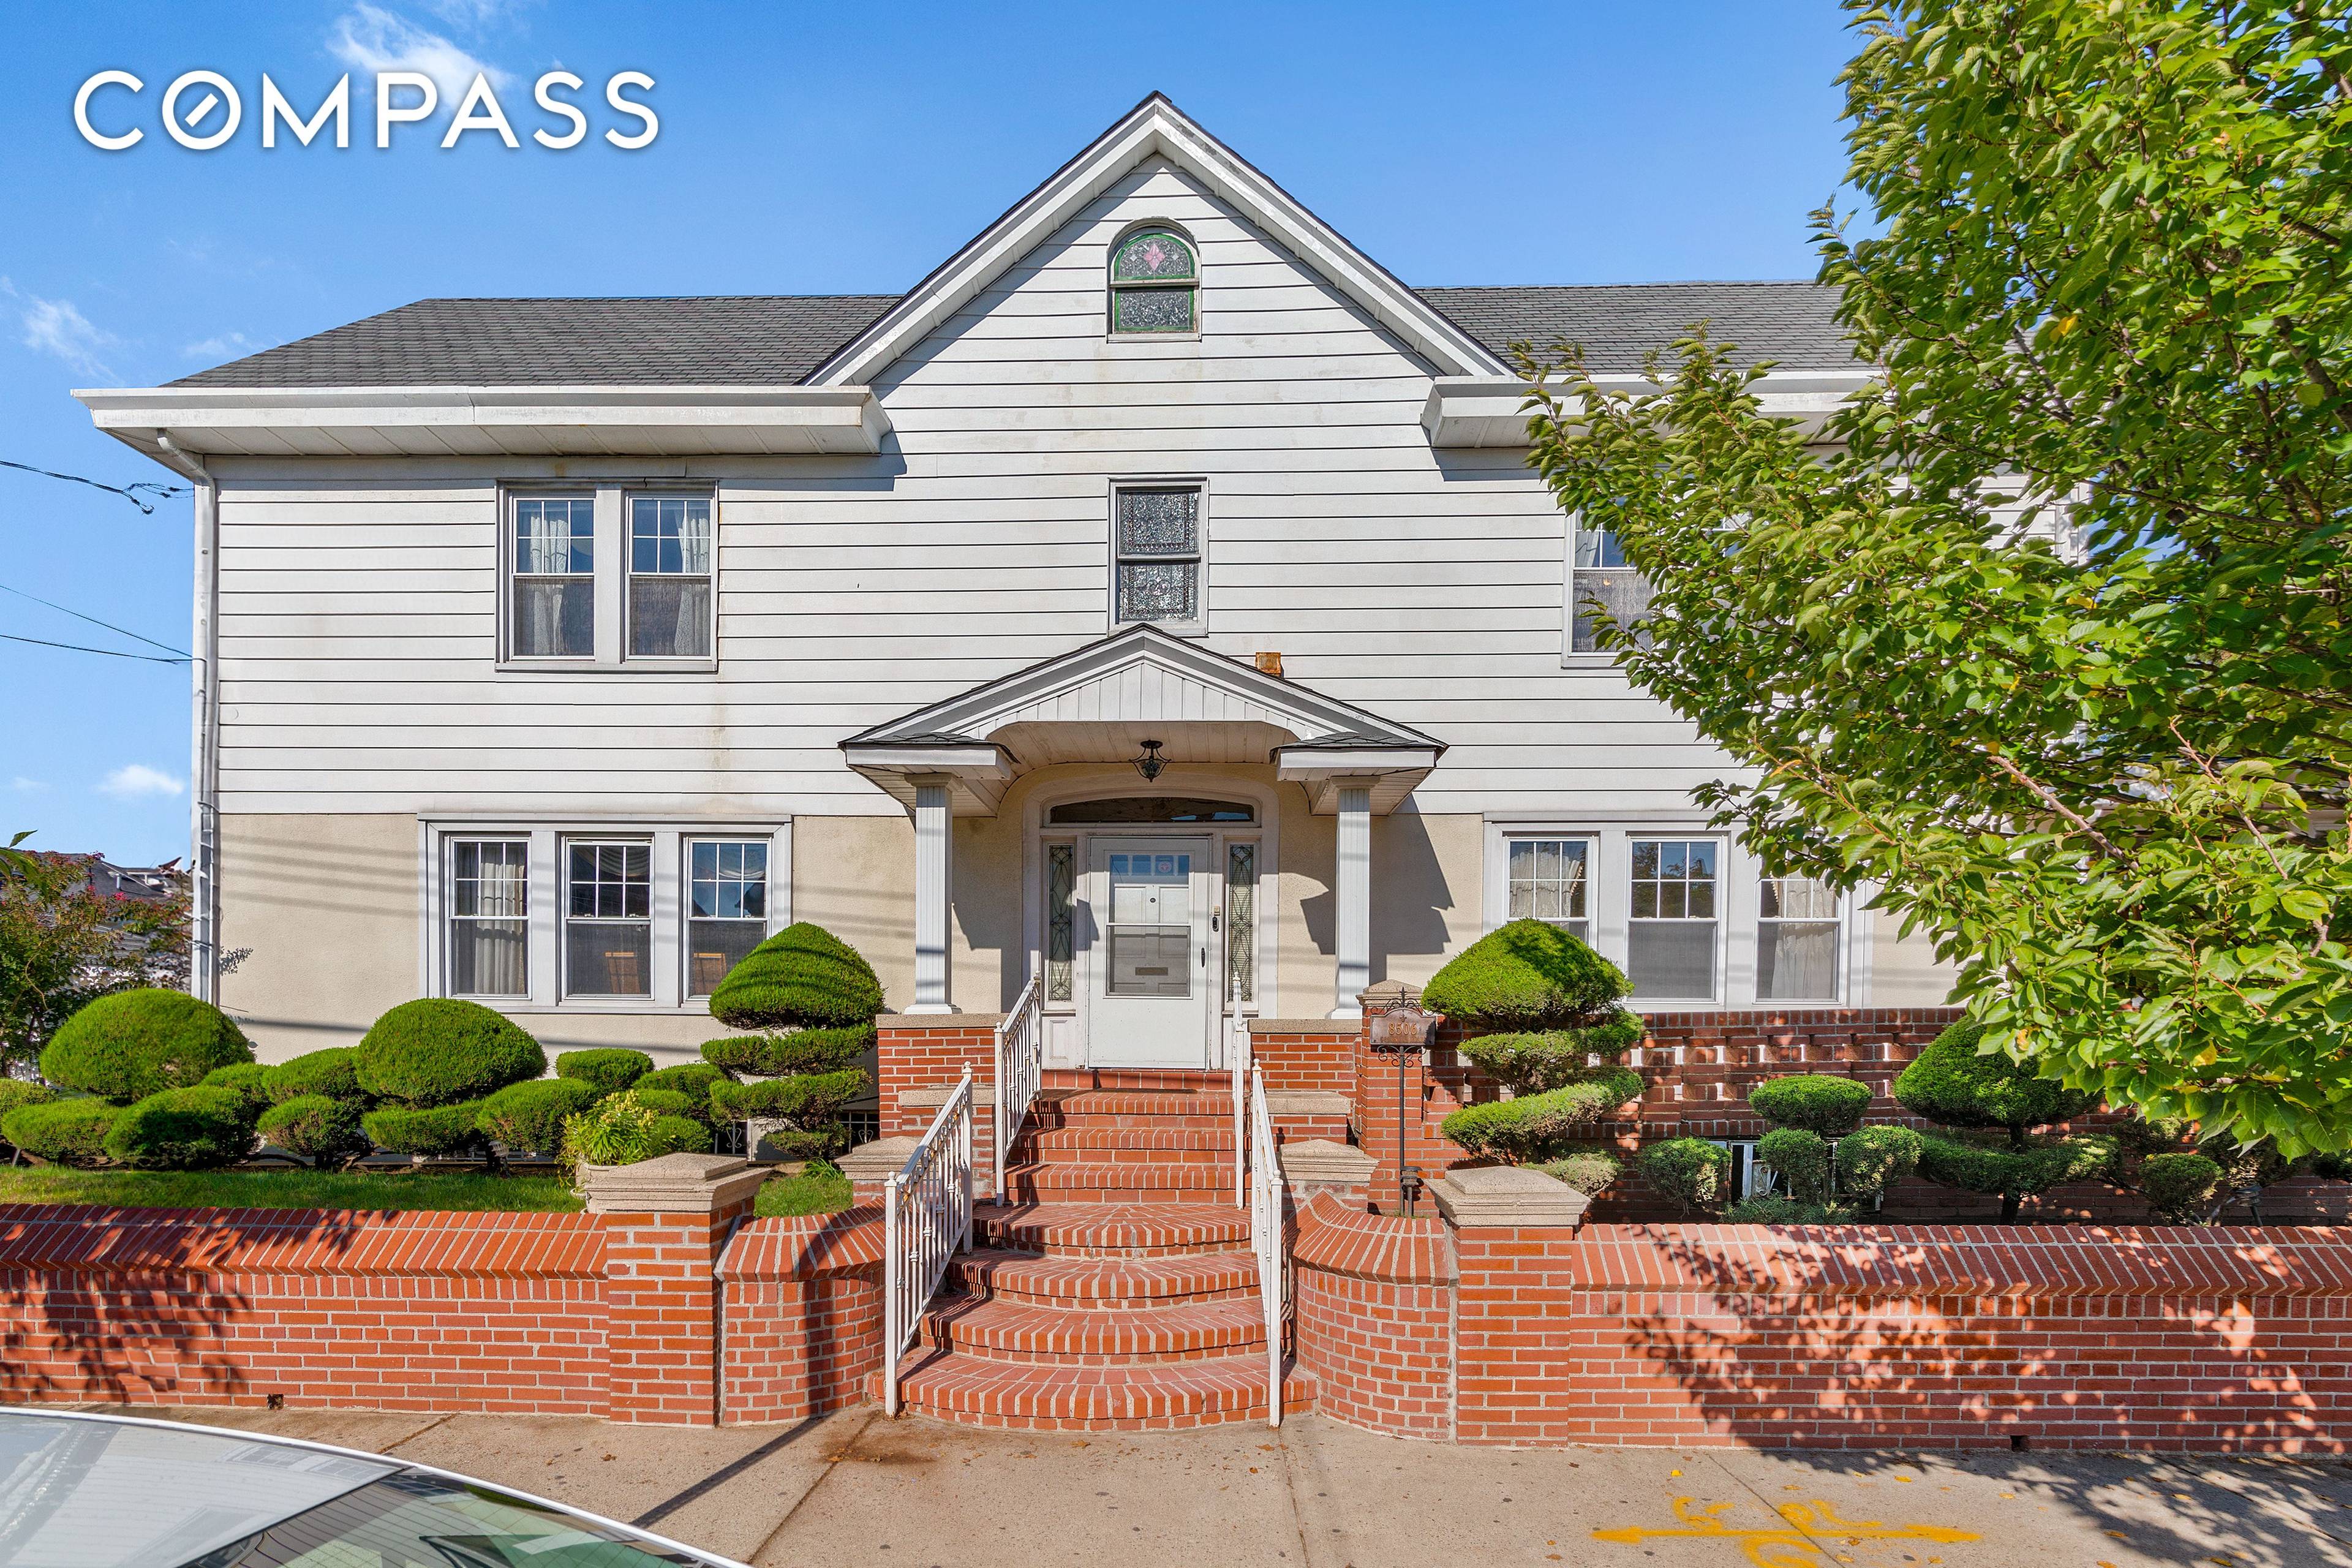 Welcome to this stunning home located in the desirable neighborhood of Bay Ridge, Brooklyn, NY.